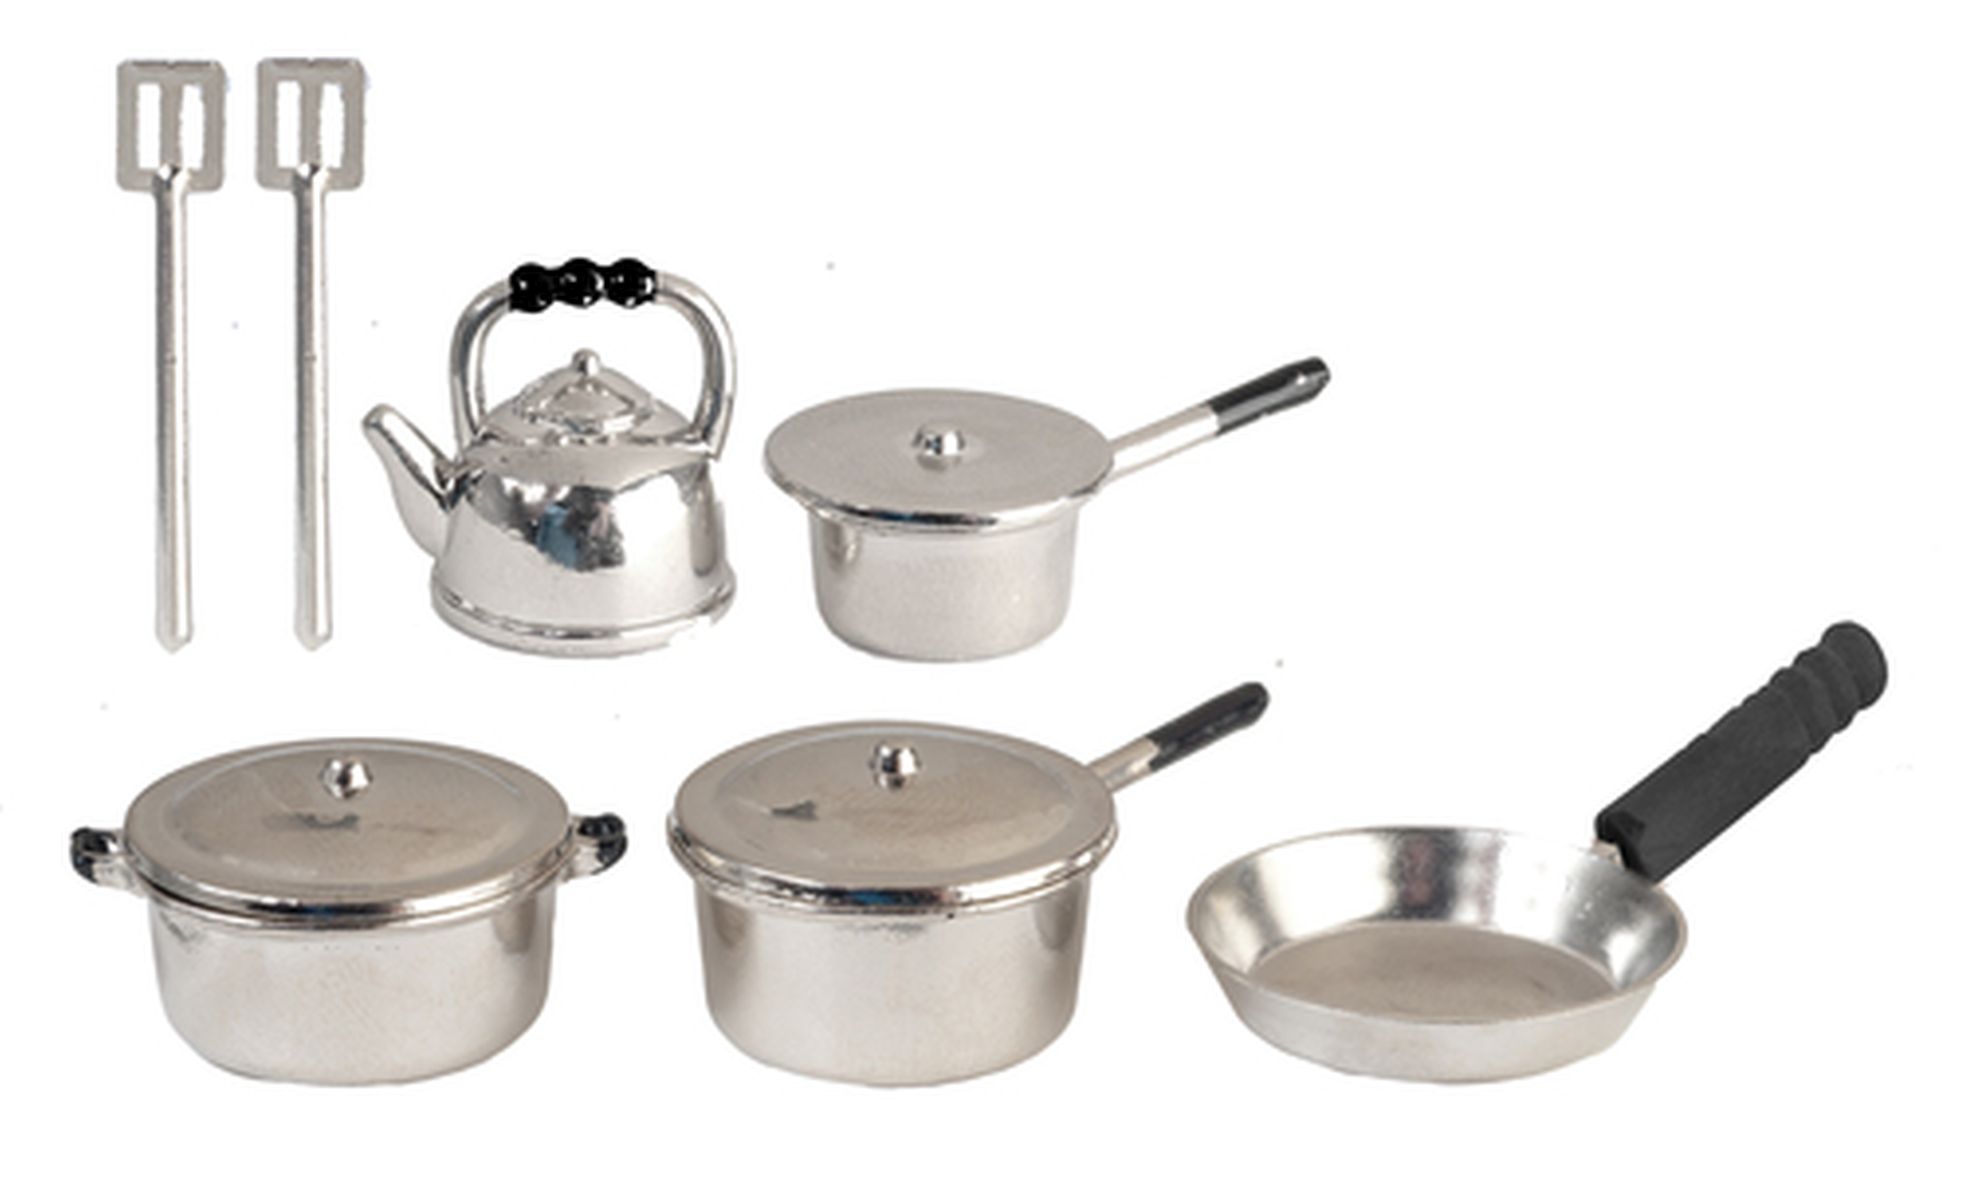 Set of Silver Pots & Pans by Town Square Miniatures